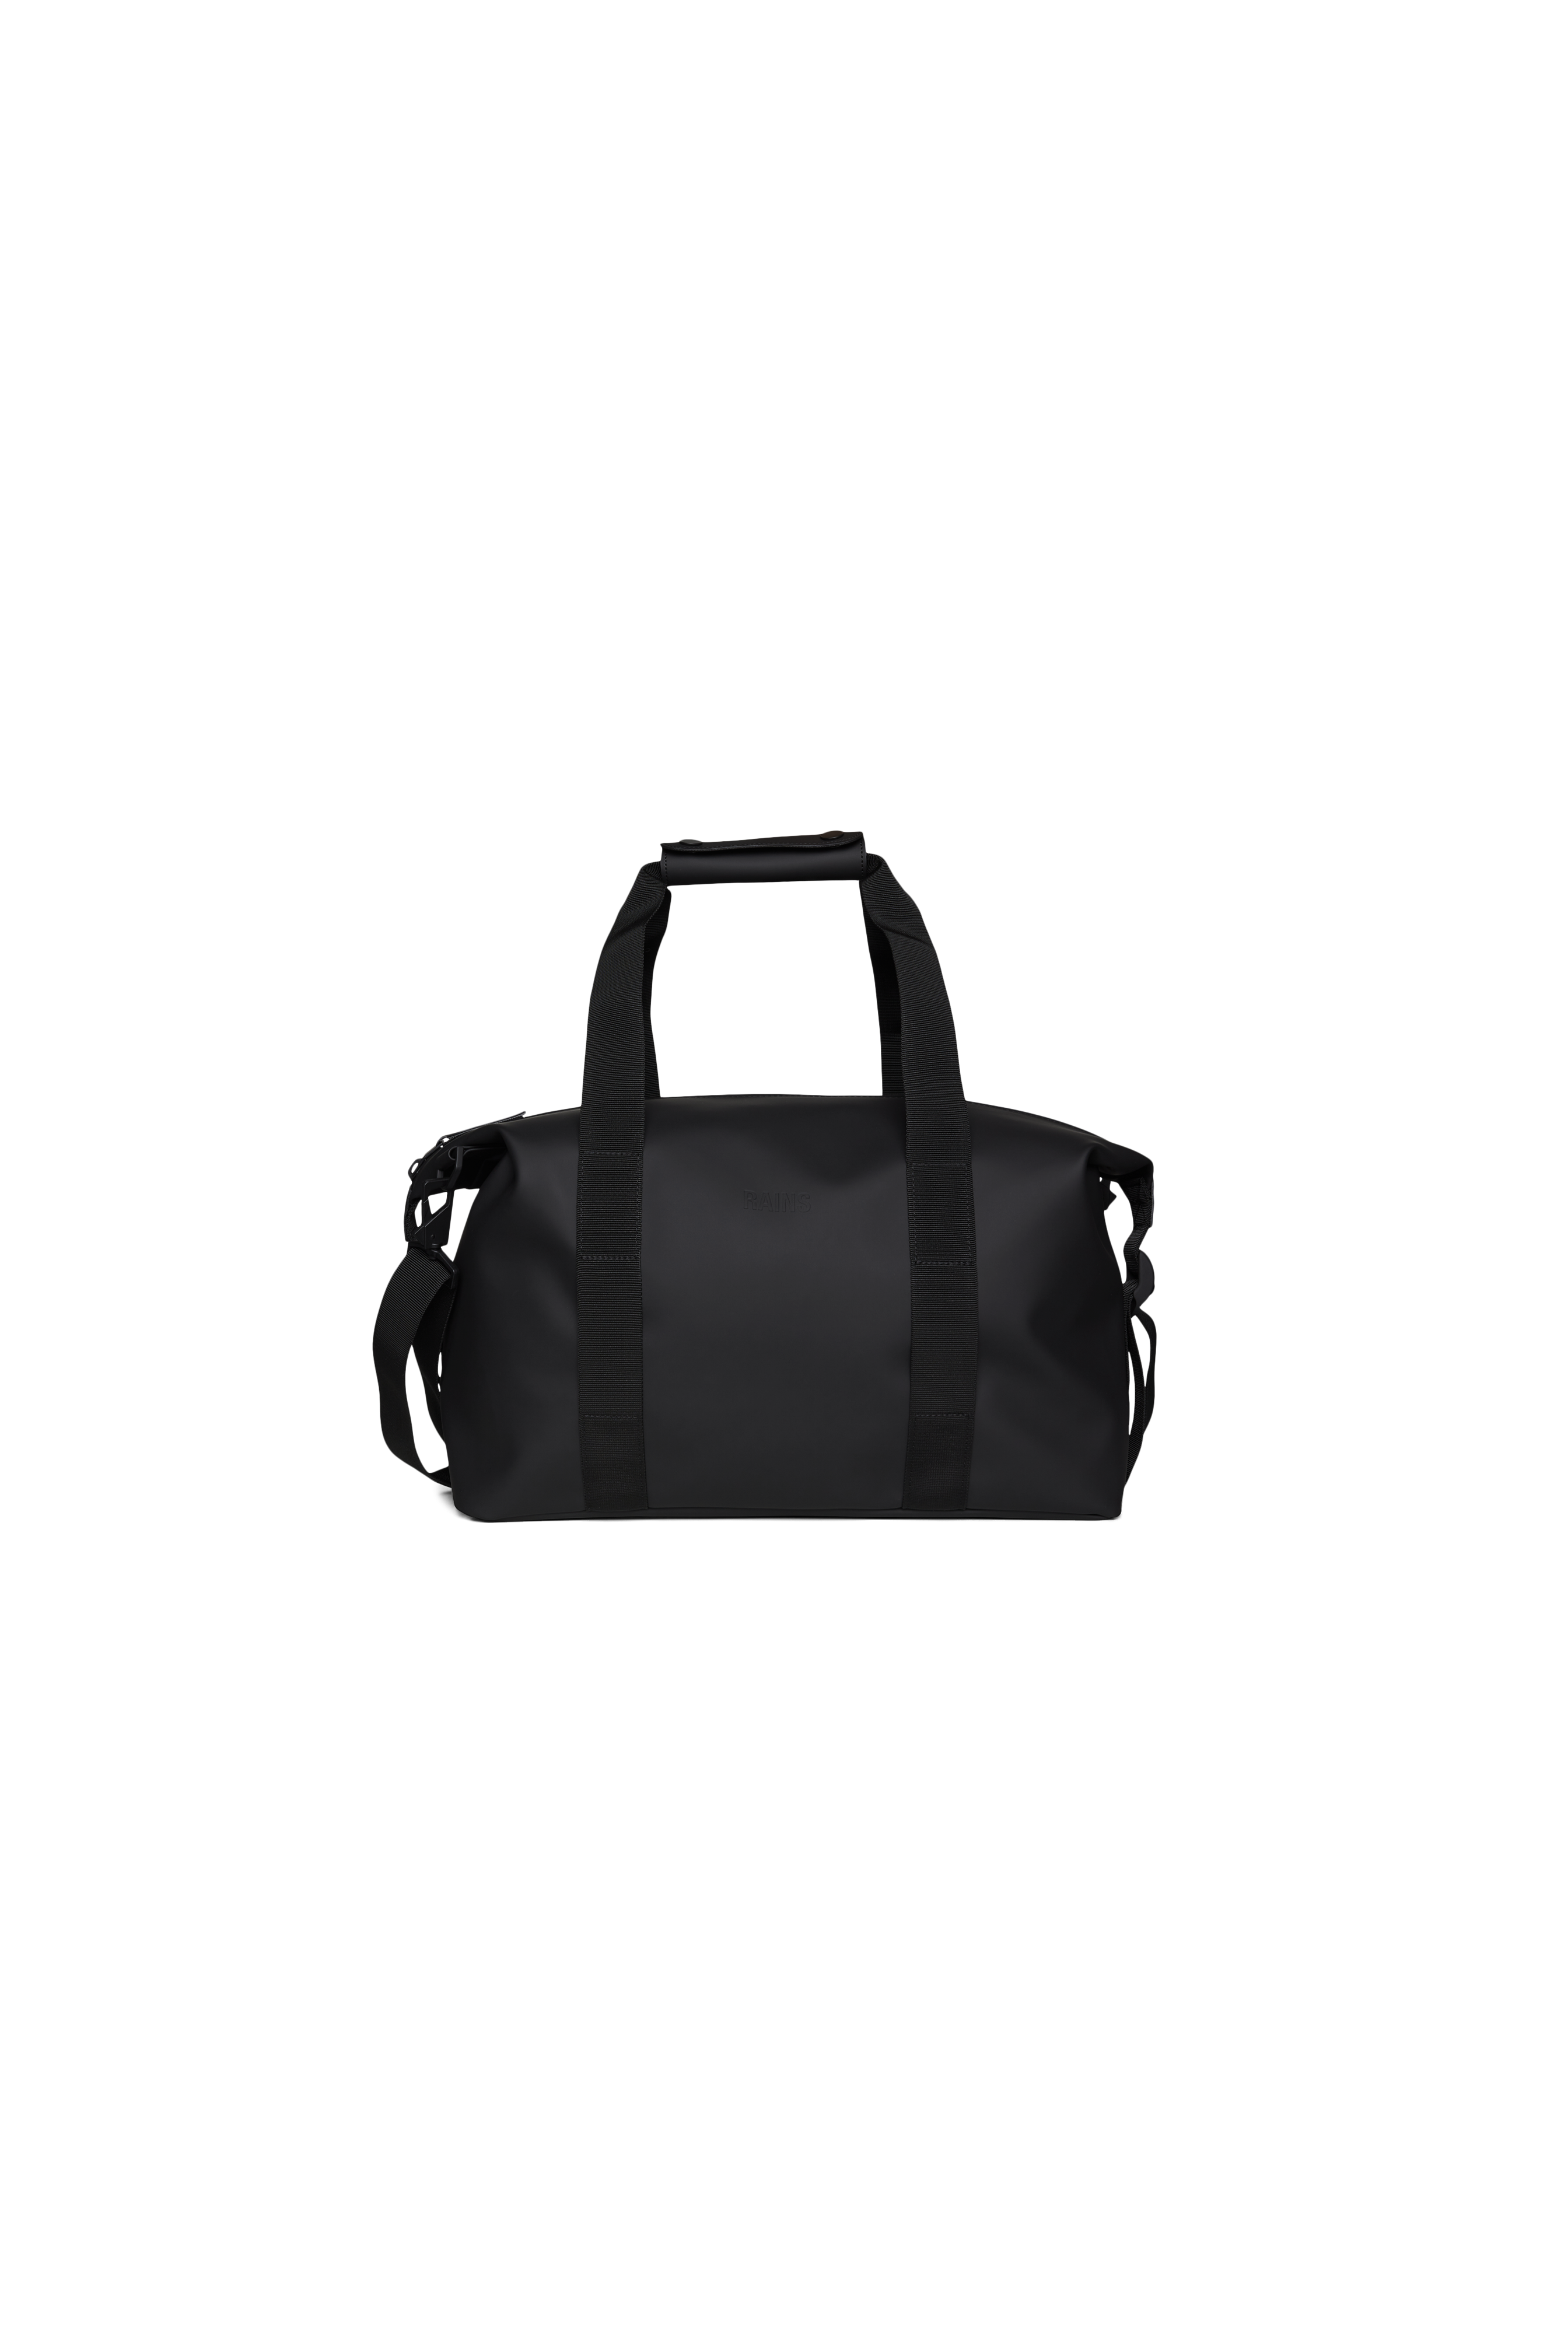 Rains® Hilo Weekend Bag Small in Sonic for $140 | Free Shipping